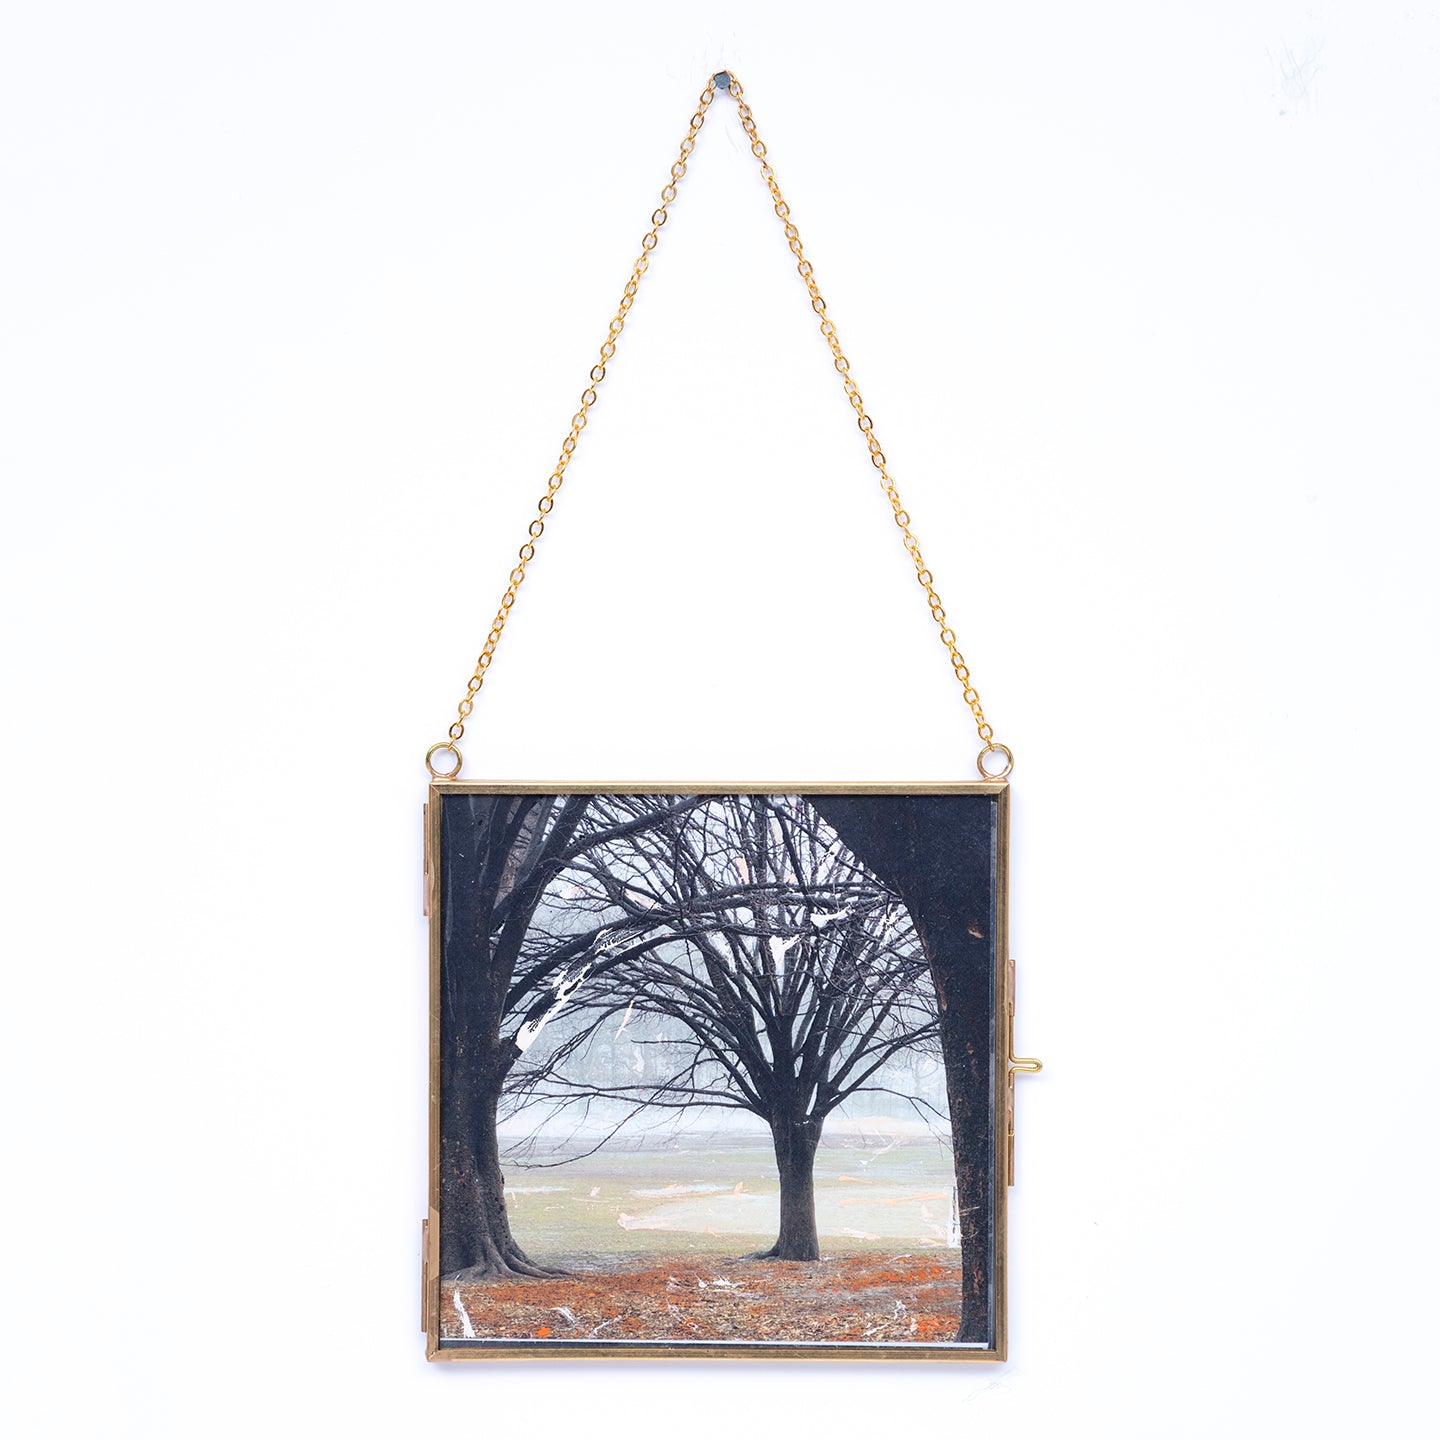 Square shaped frames with artistic images of nature title Wood U from Everyday Art Editions